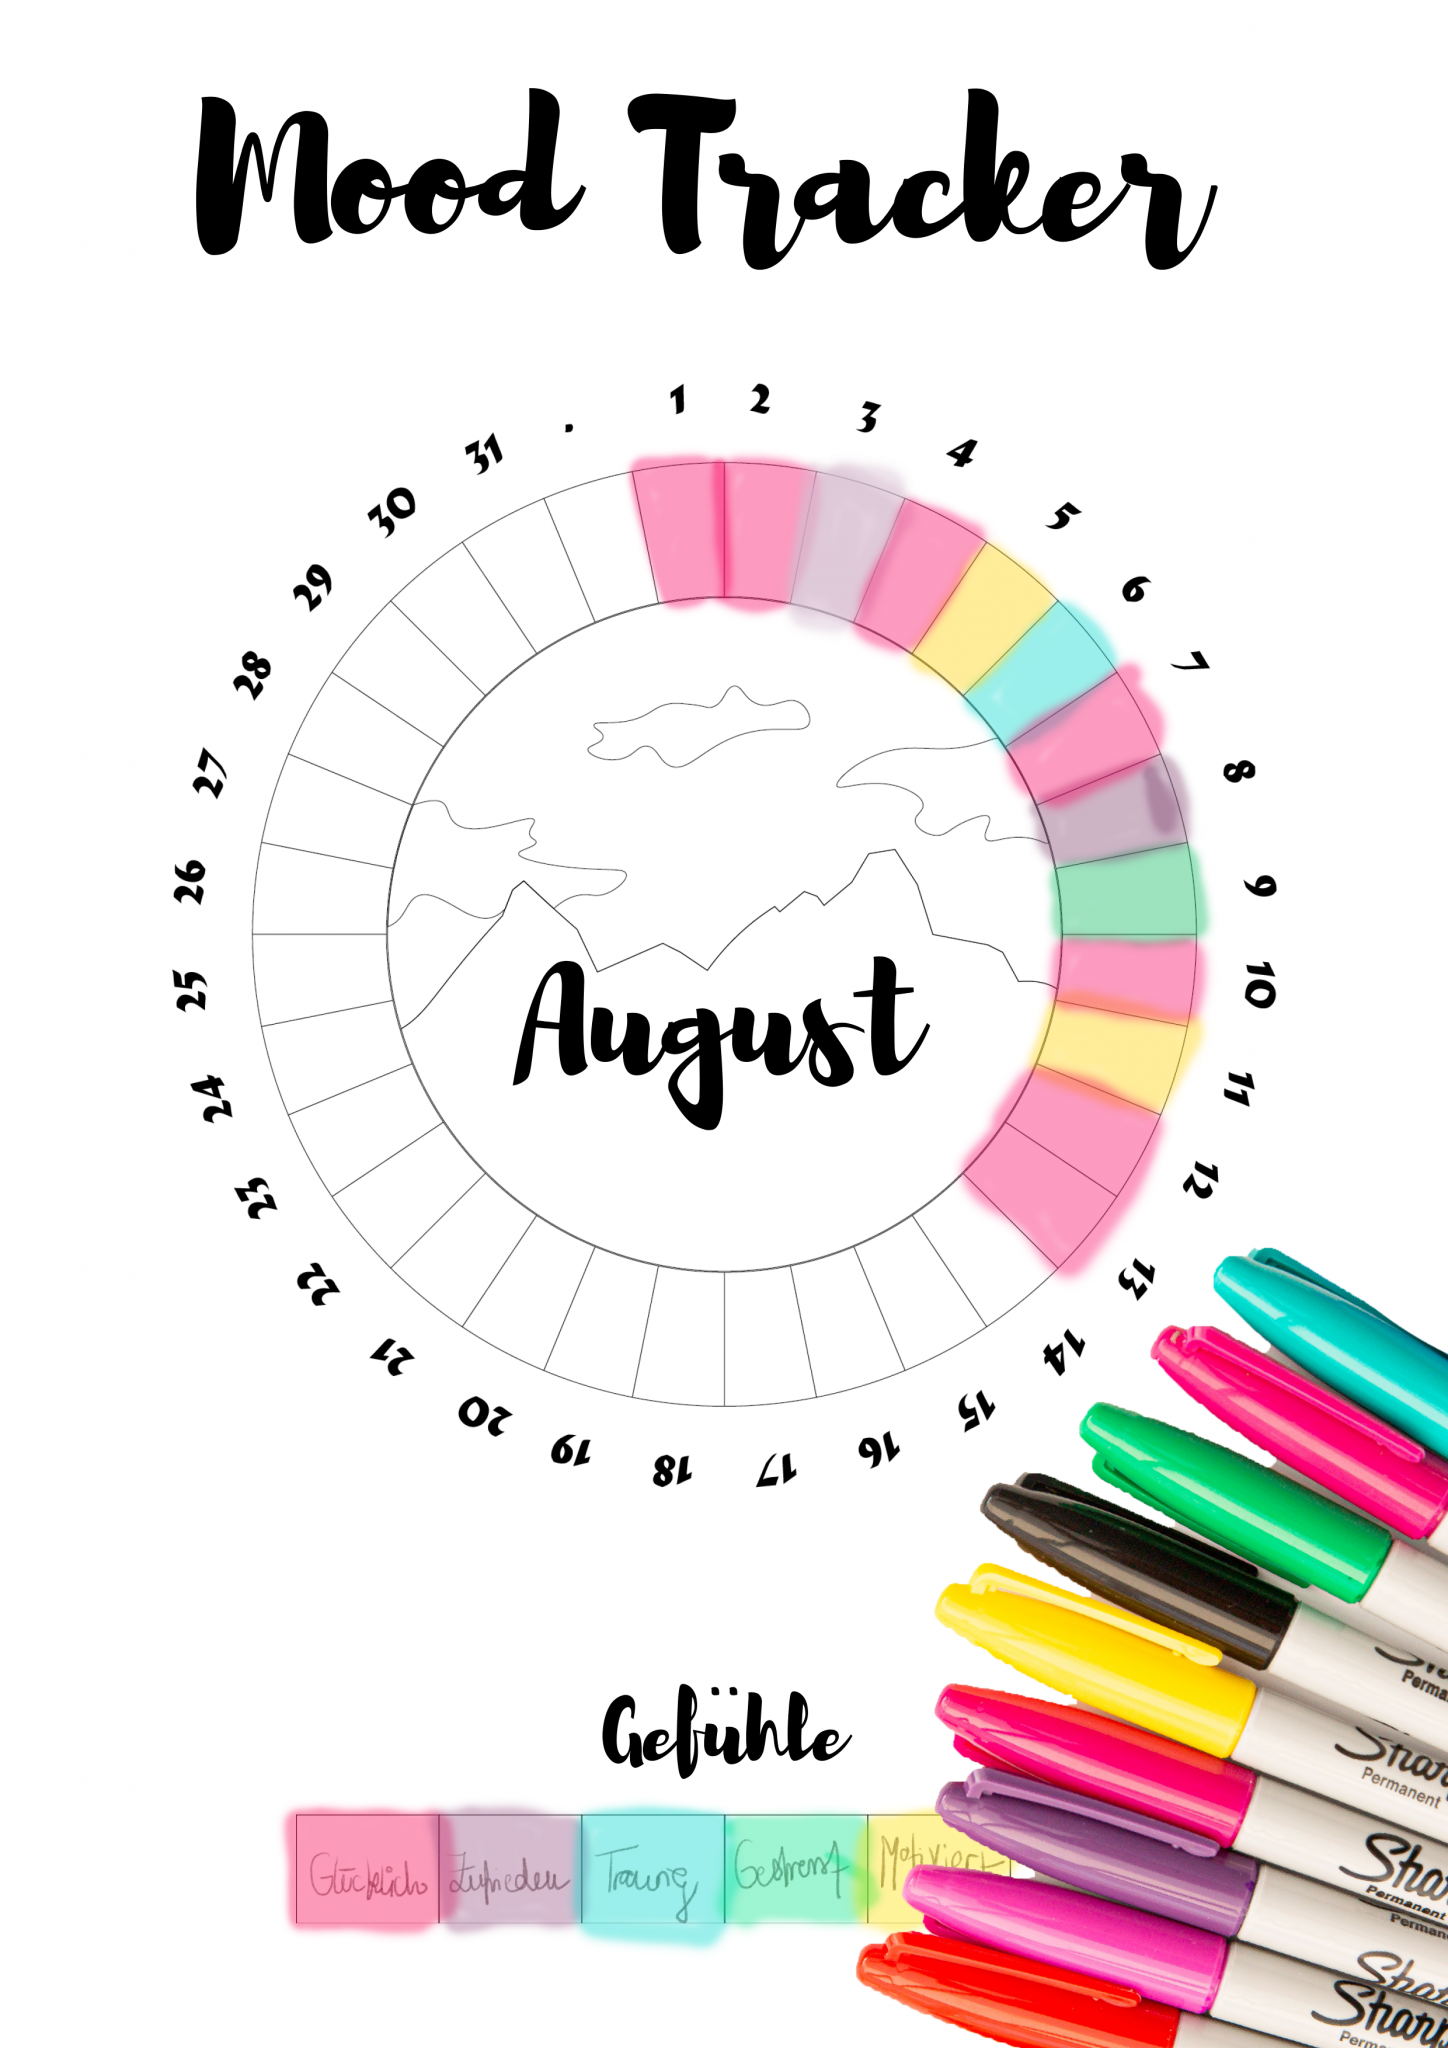 Mood Tracker BesserMe months Practice your mindfulness